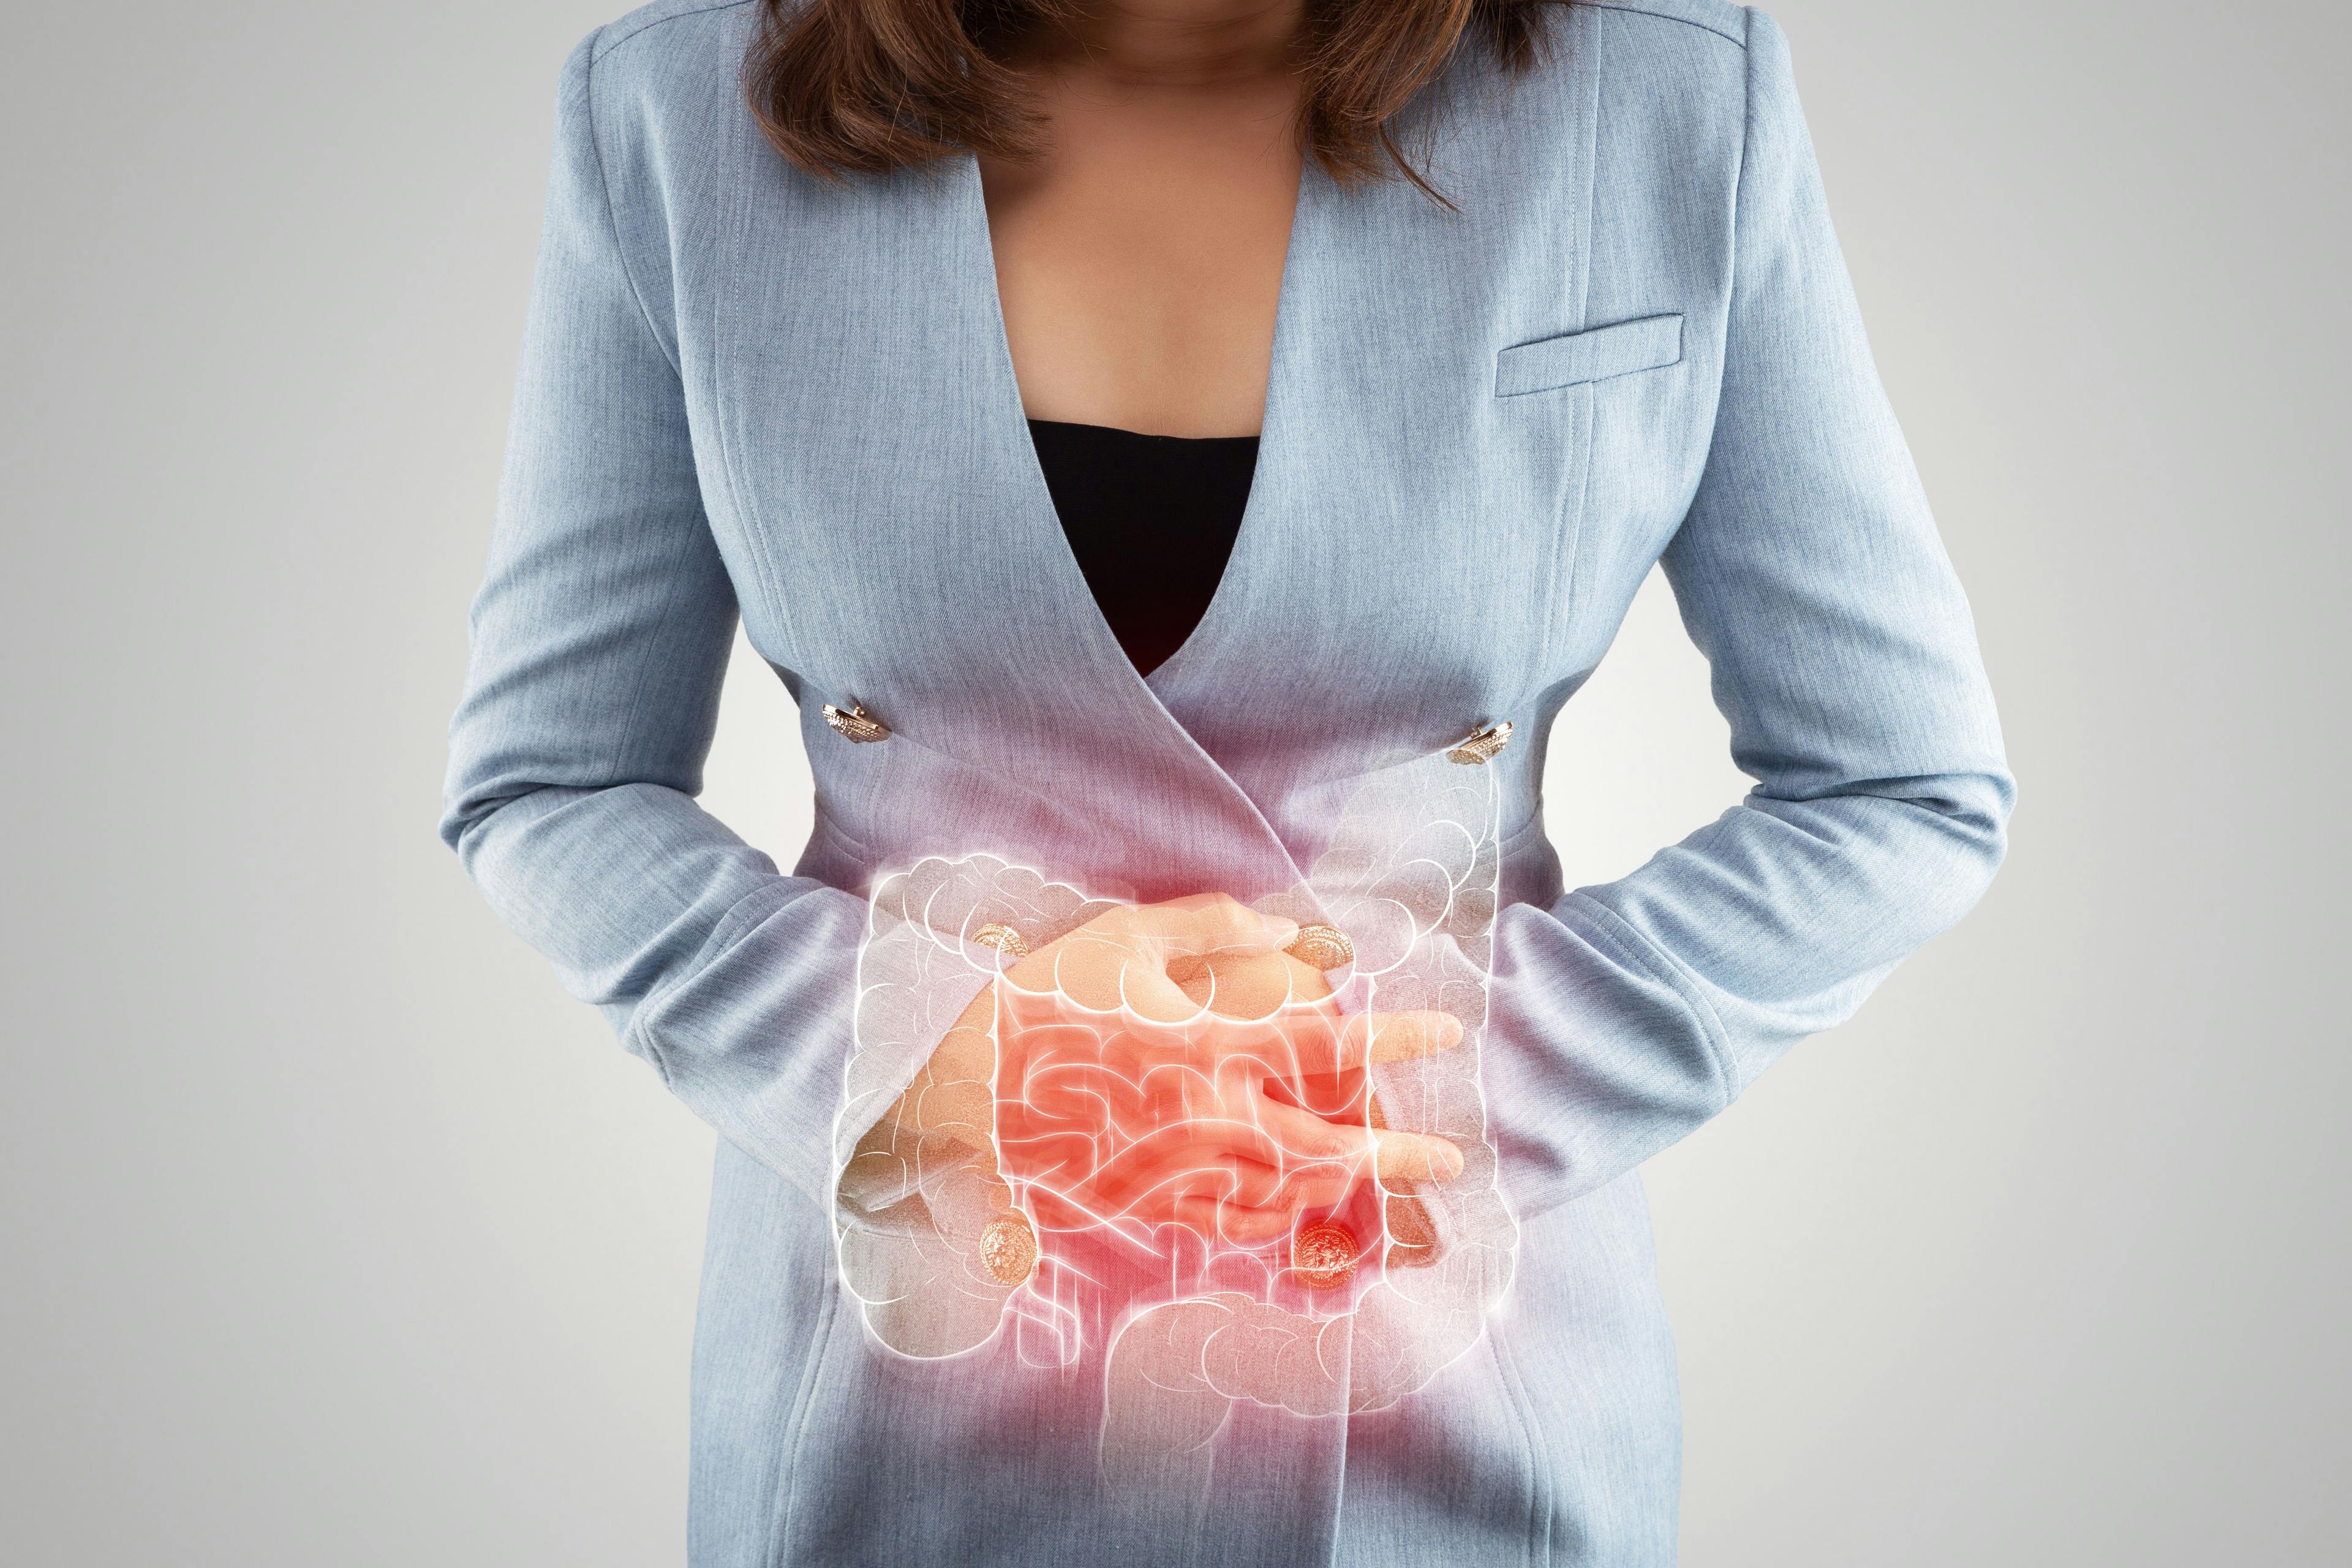 woman in blue suit holding her abdomen in pain | Image Credit: eddows - stock.adobe.com